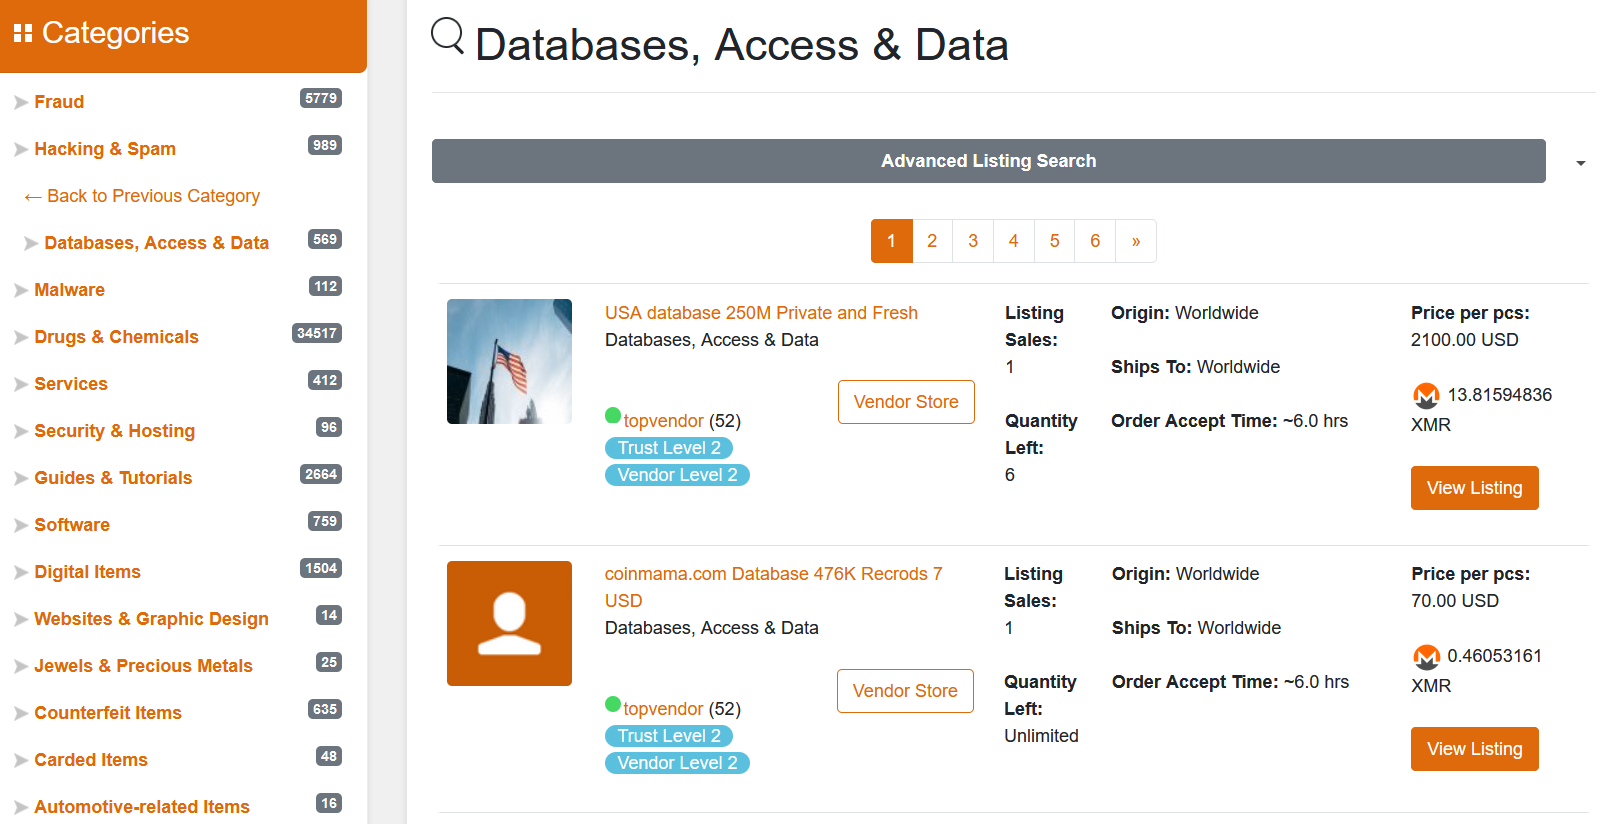 AlphaBay Market’s Databases category page